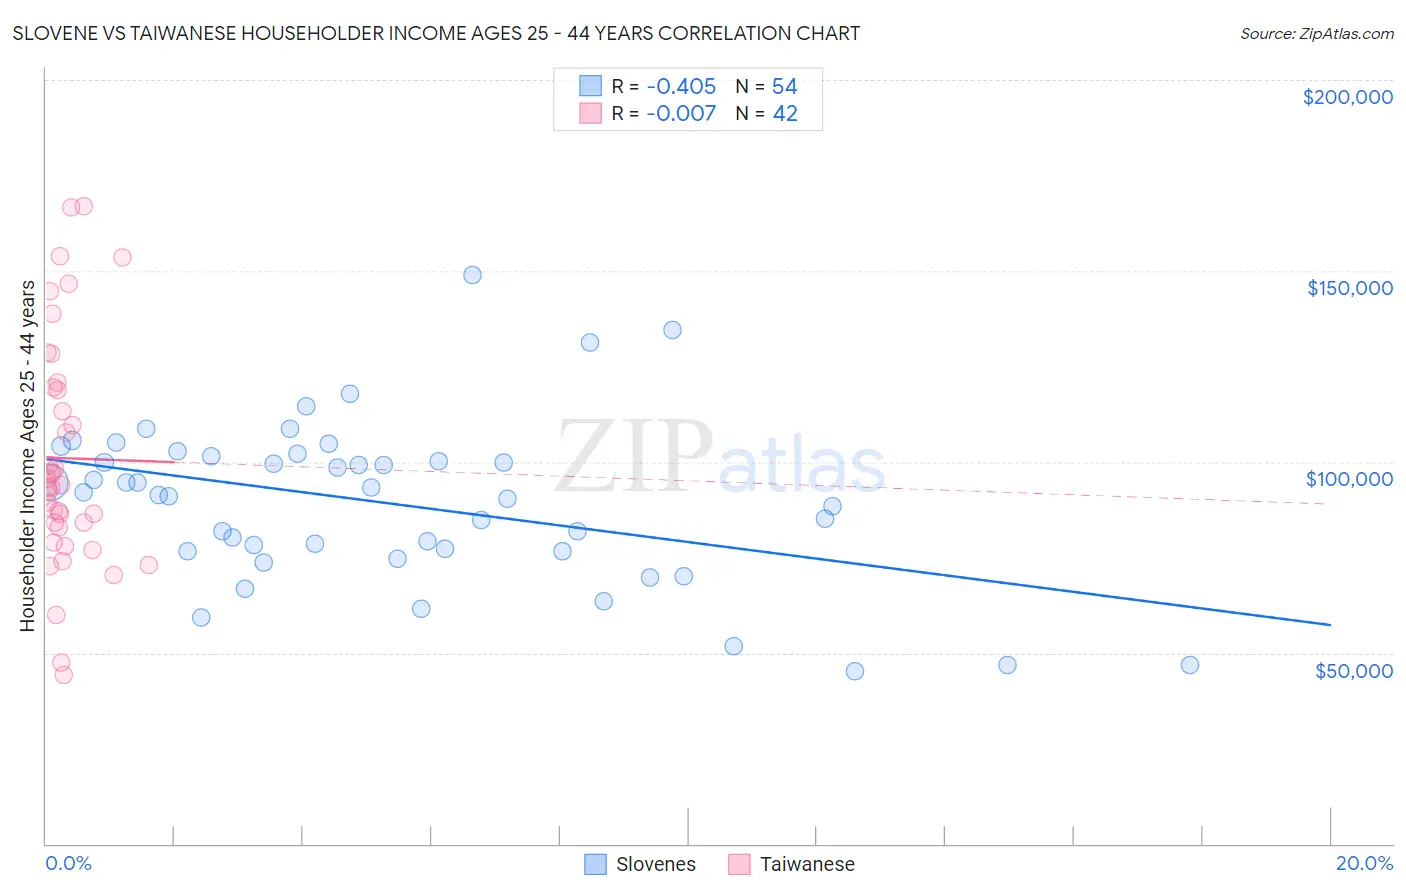 Slovene vs Taiwanese Householder Income Ages 25 - 44 years